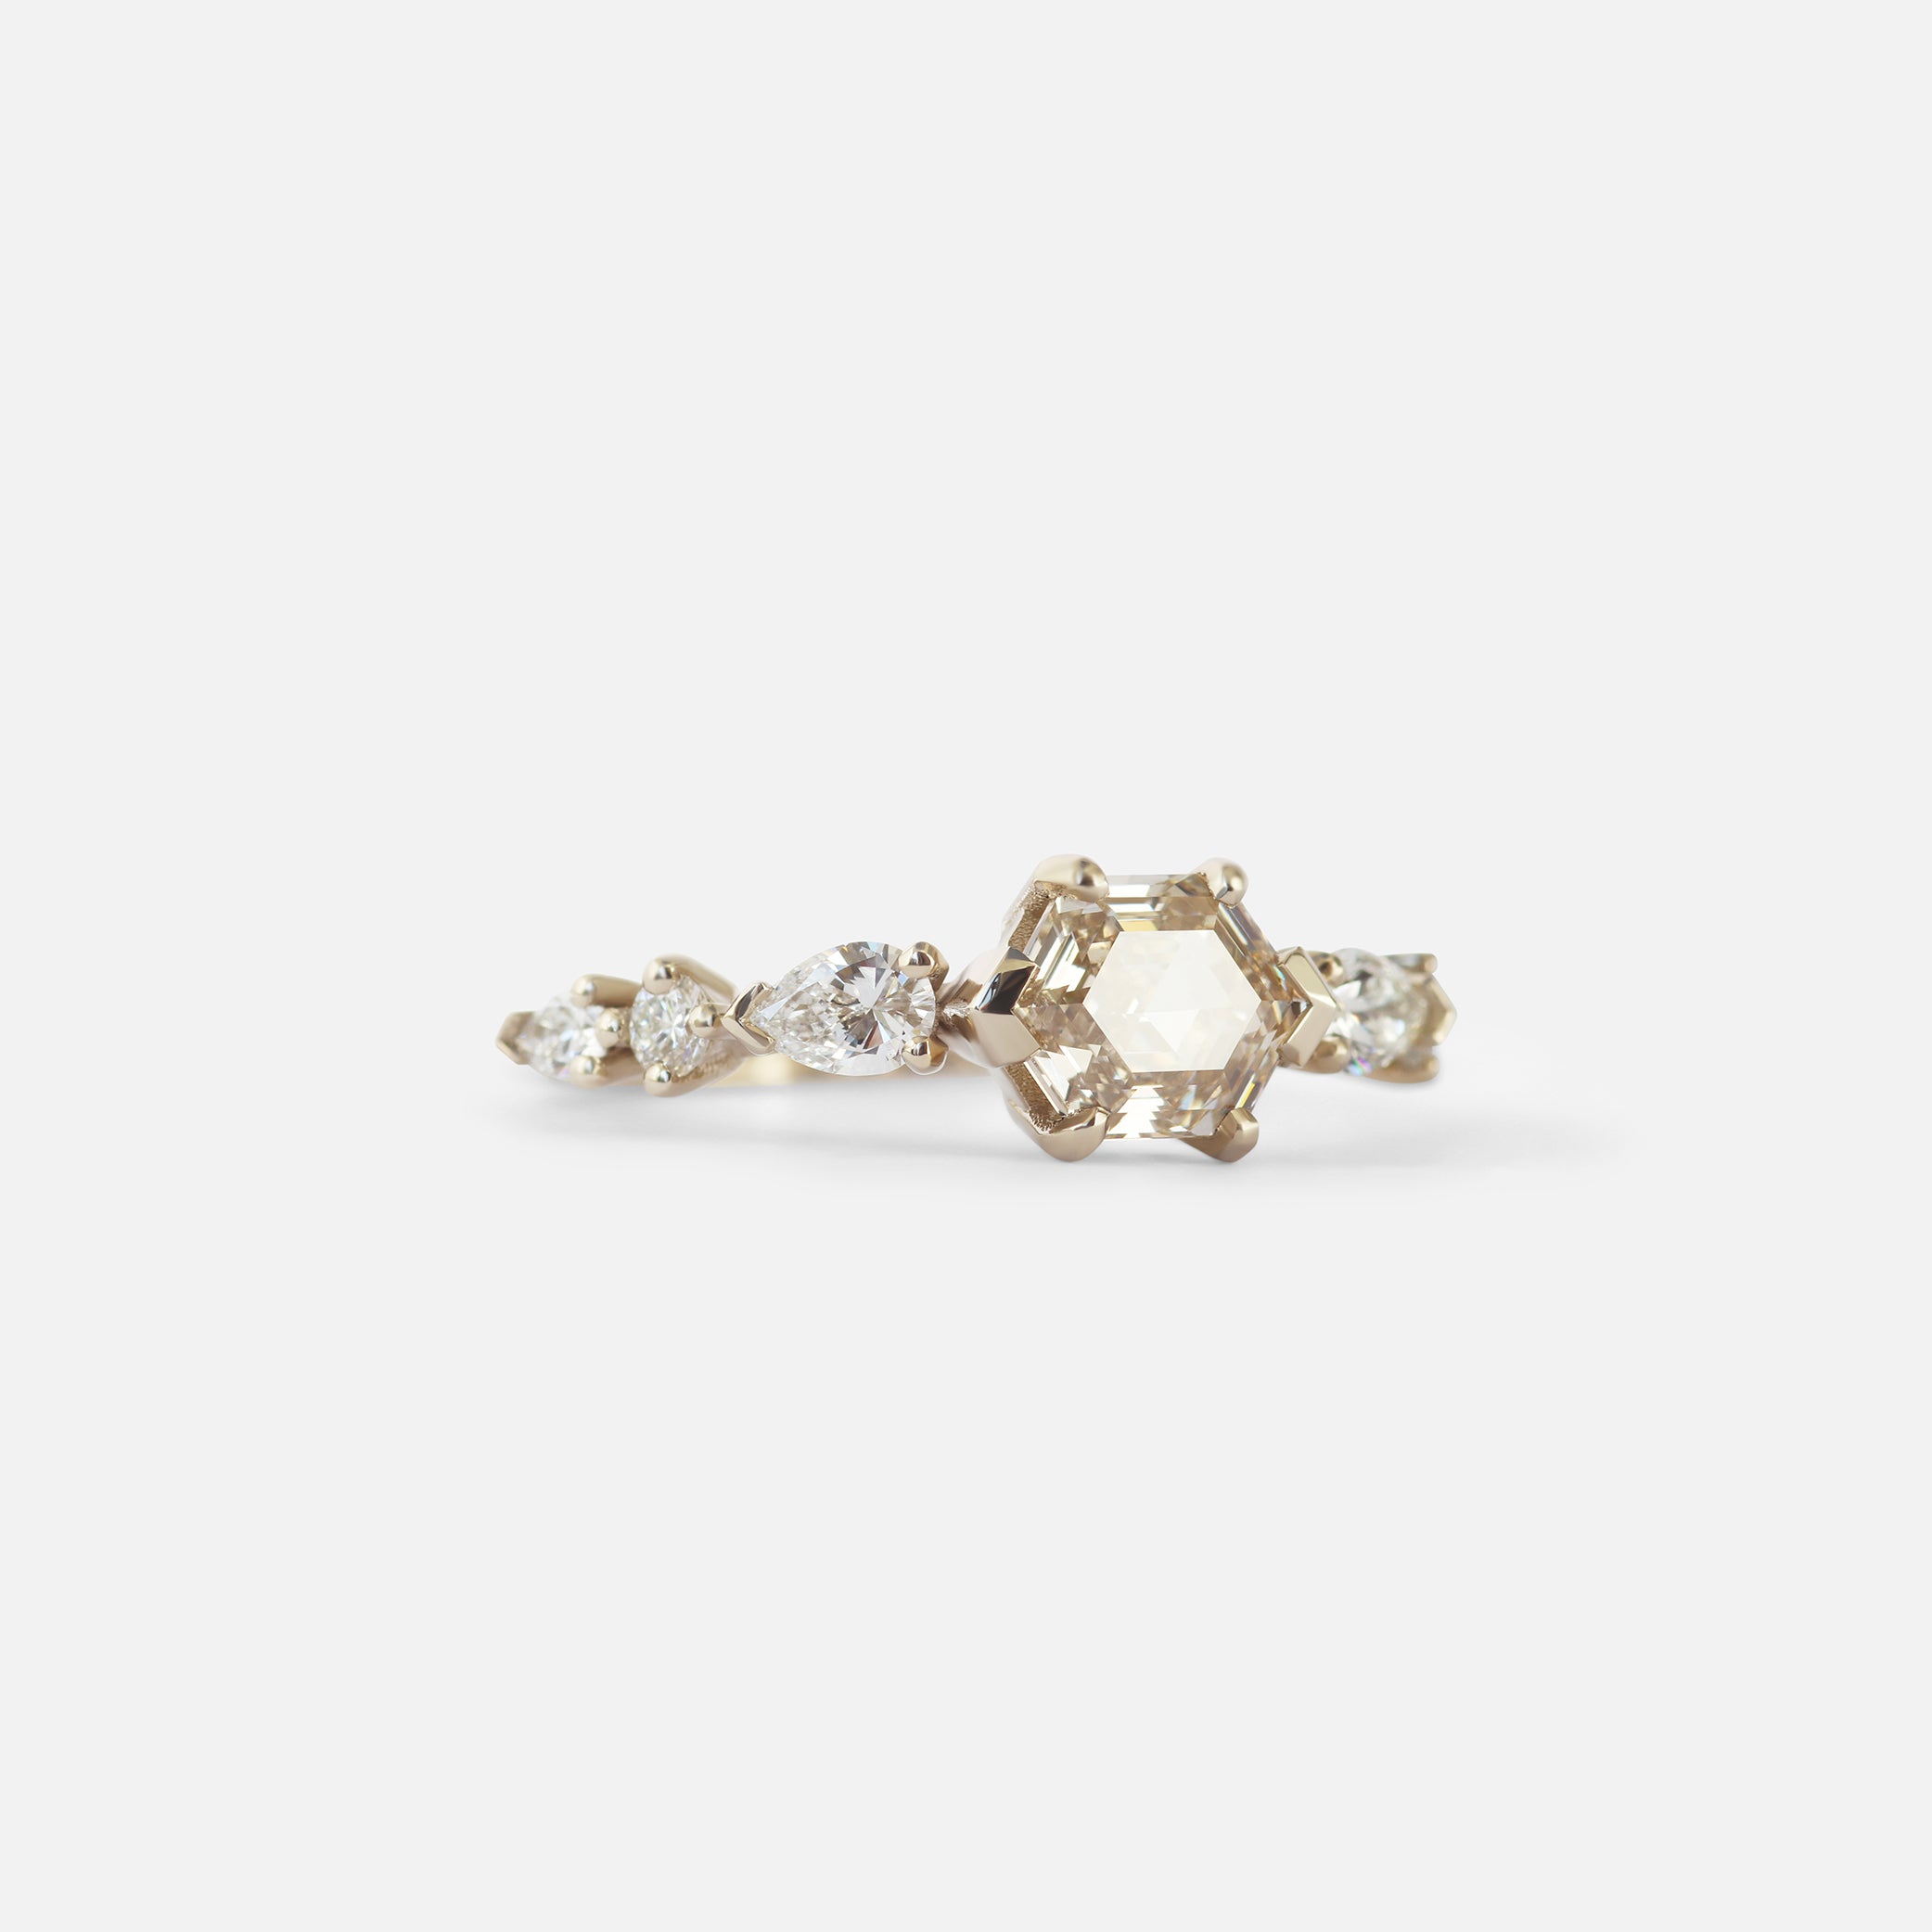 Champagne Hex and Pears / Ring By fitzgerald jewelry in ENGAGEMENT Category